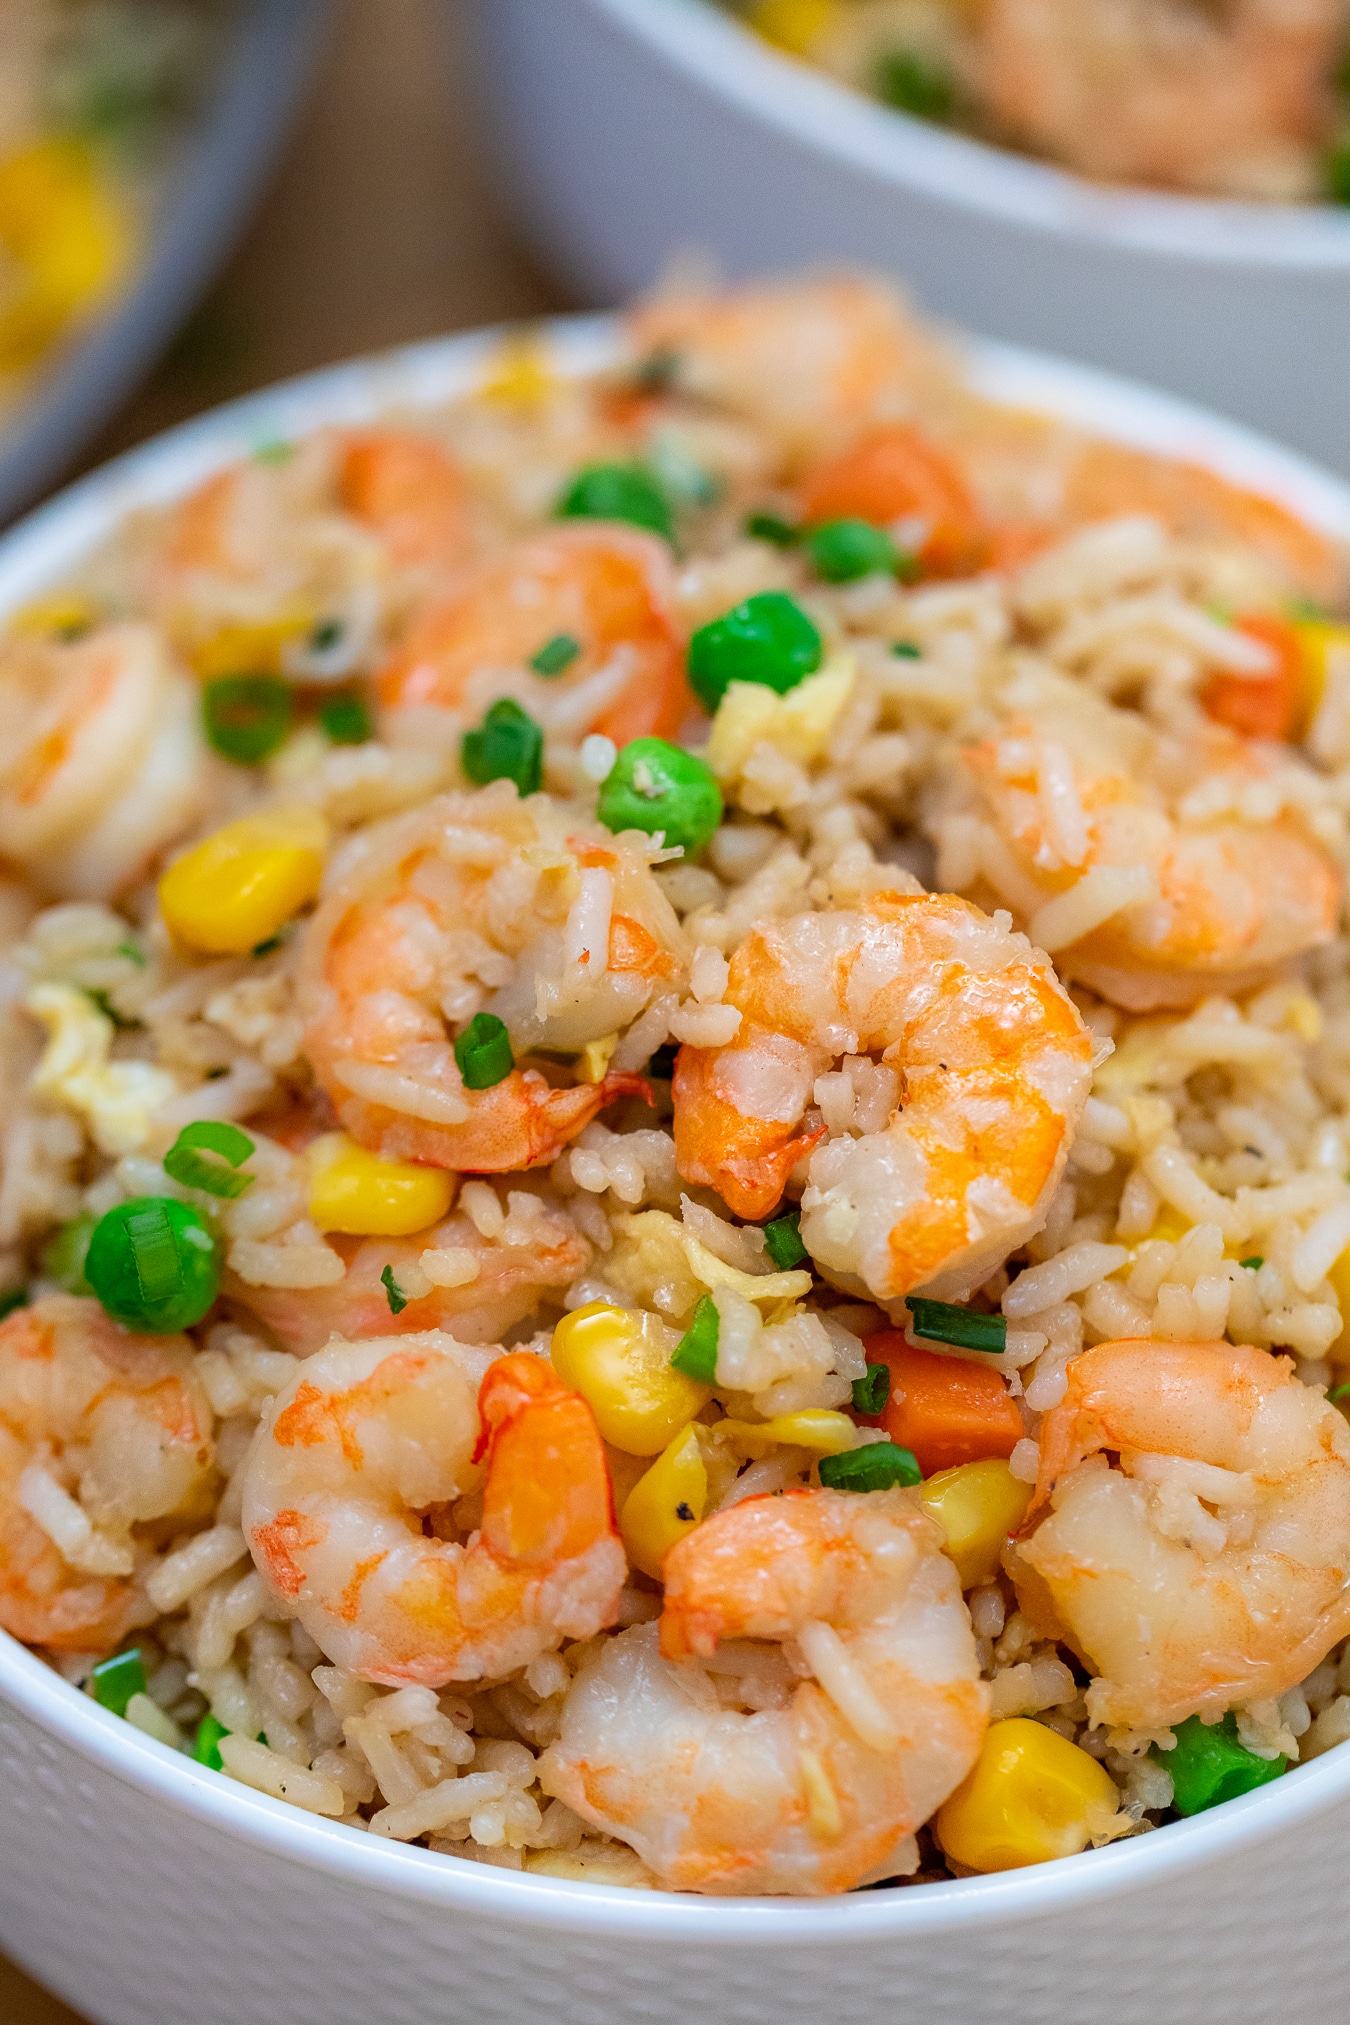 15 Best Fried Rice and Shrimp – Easy Recipes To Make at Home